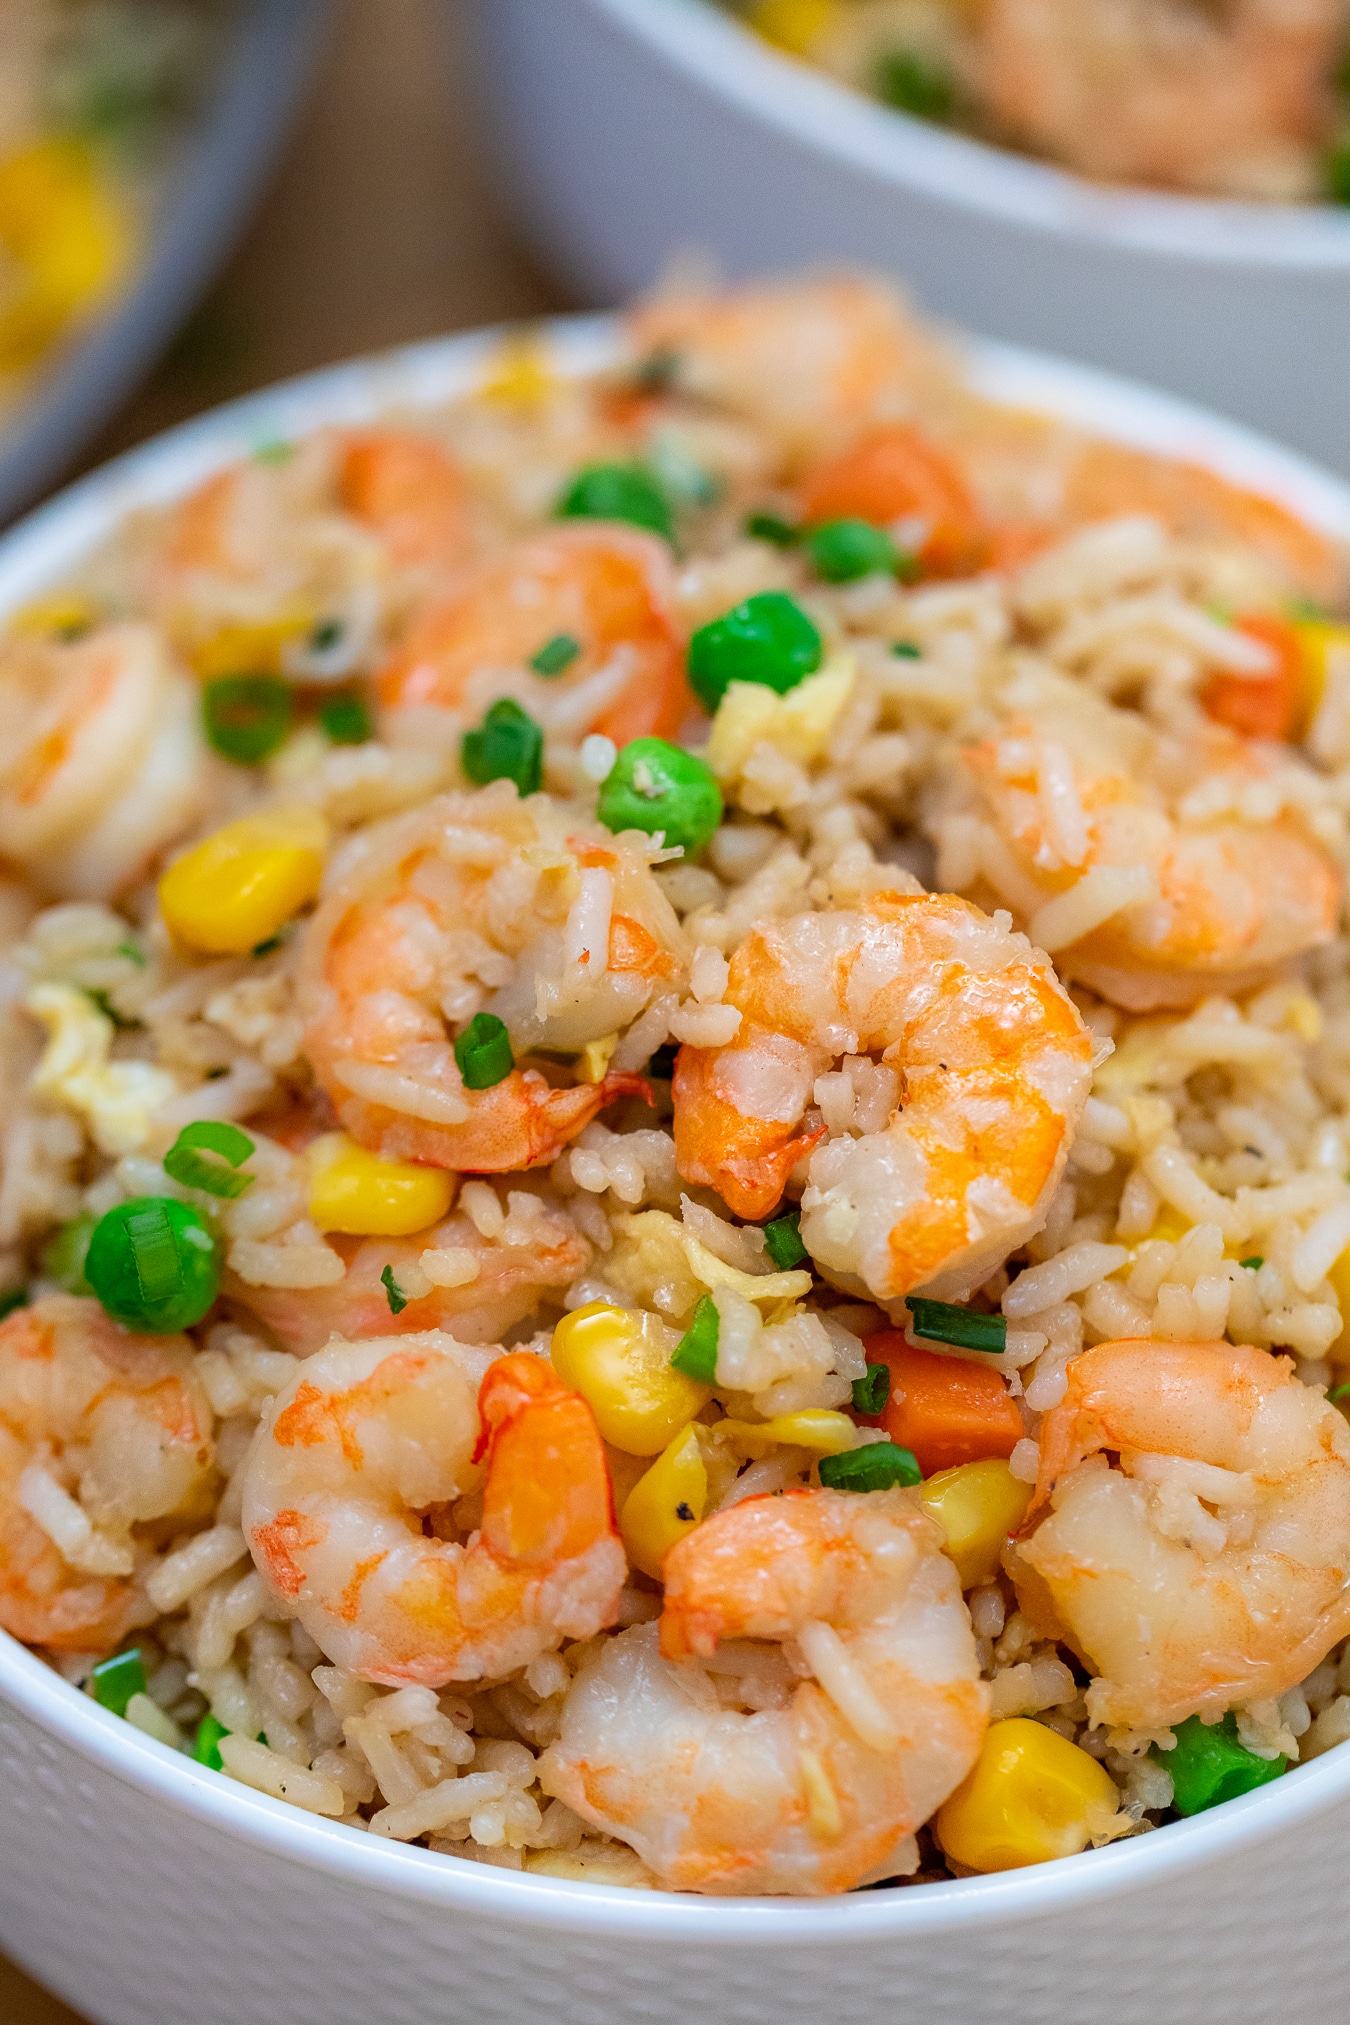 15 Best Fried Rice and Shrimp – Easy Recipes To Make at Home